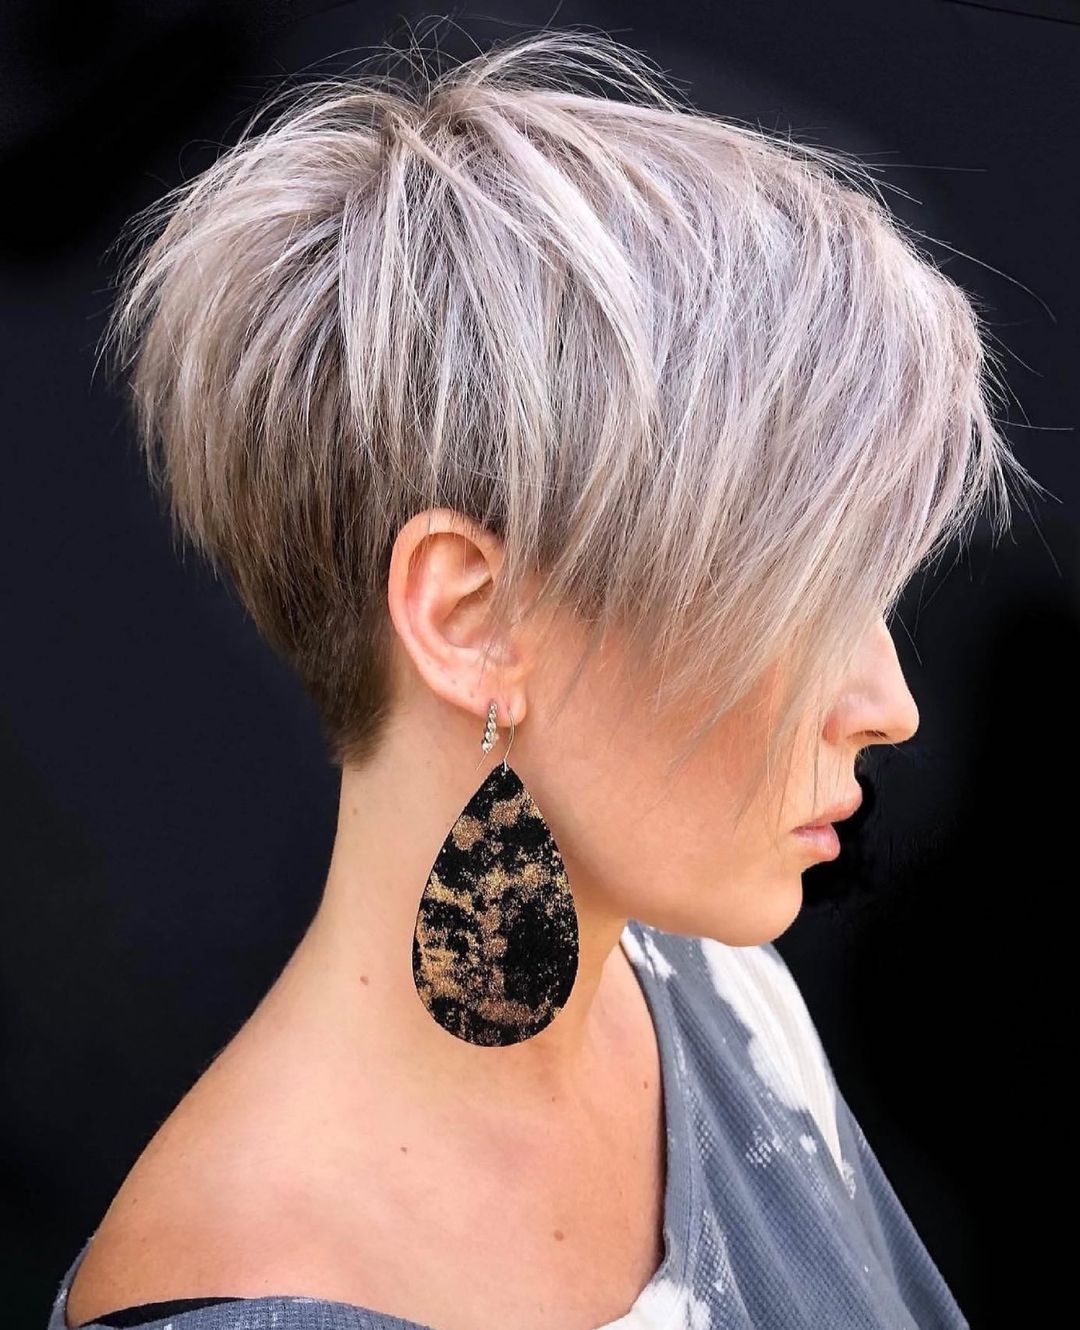 10 Best Ideas for Short Pixie Cuts & Hairstyles PoP Haircuts